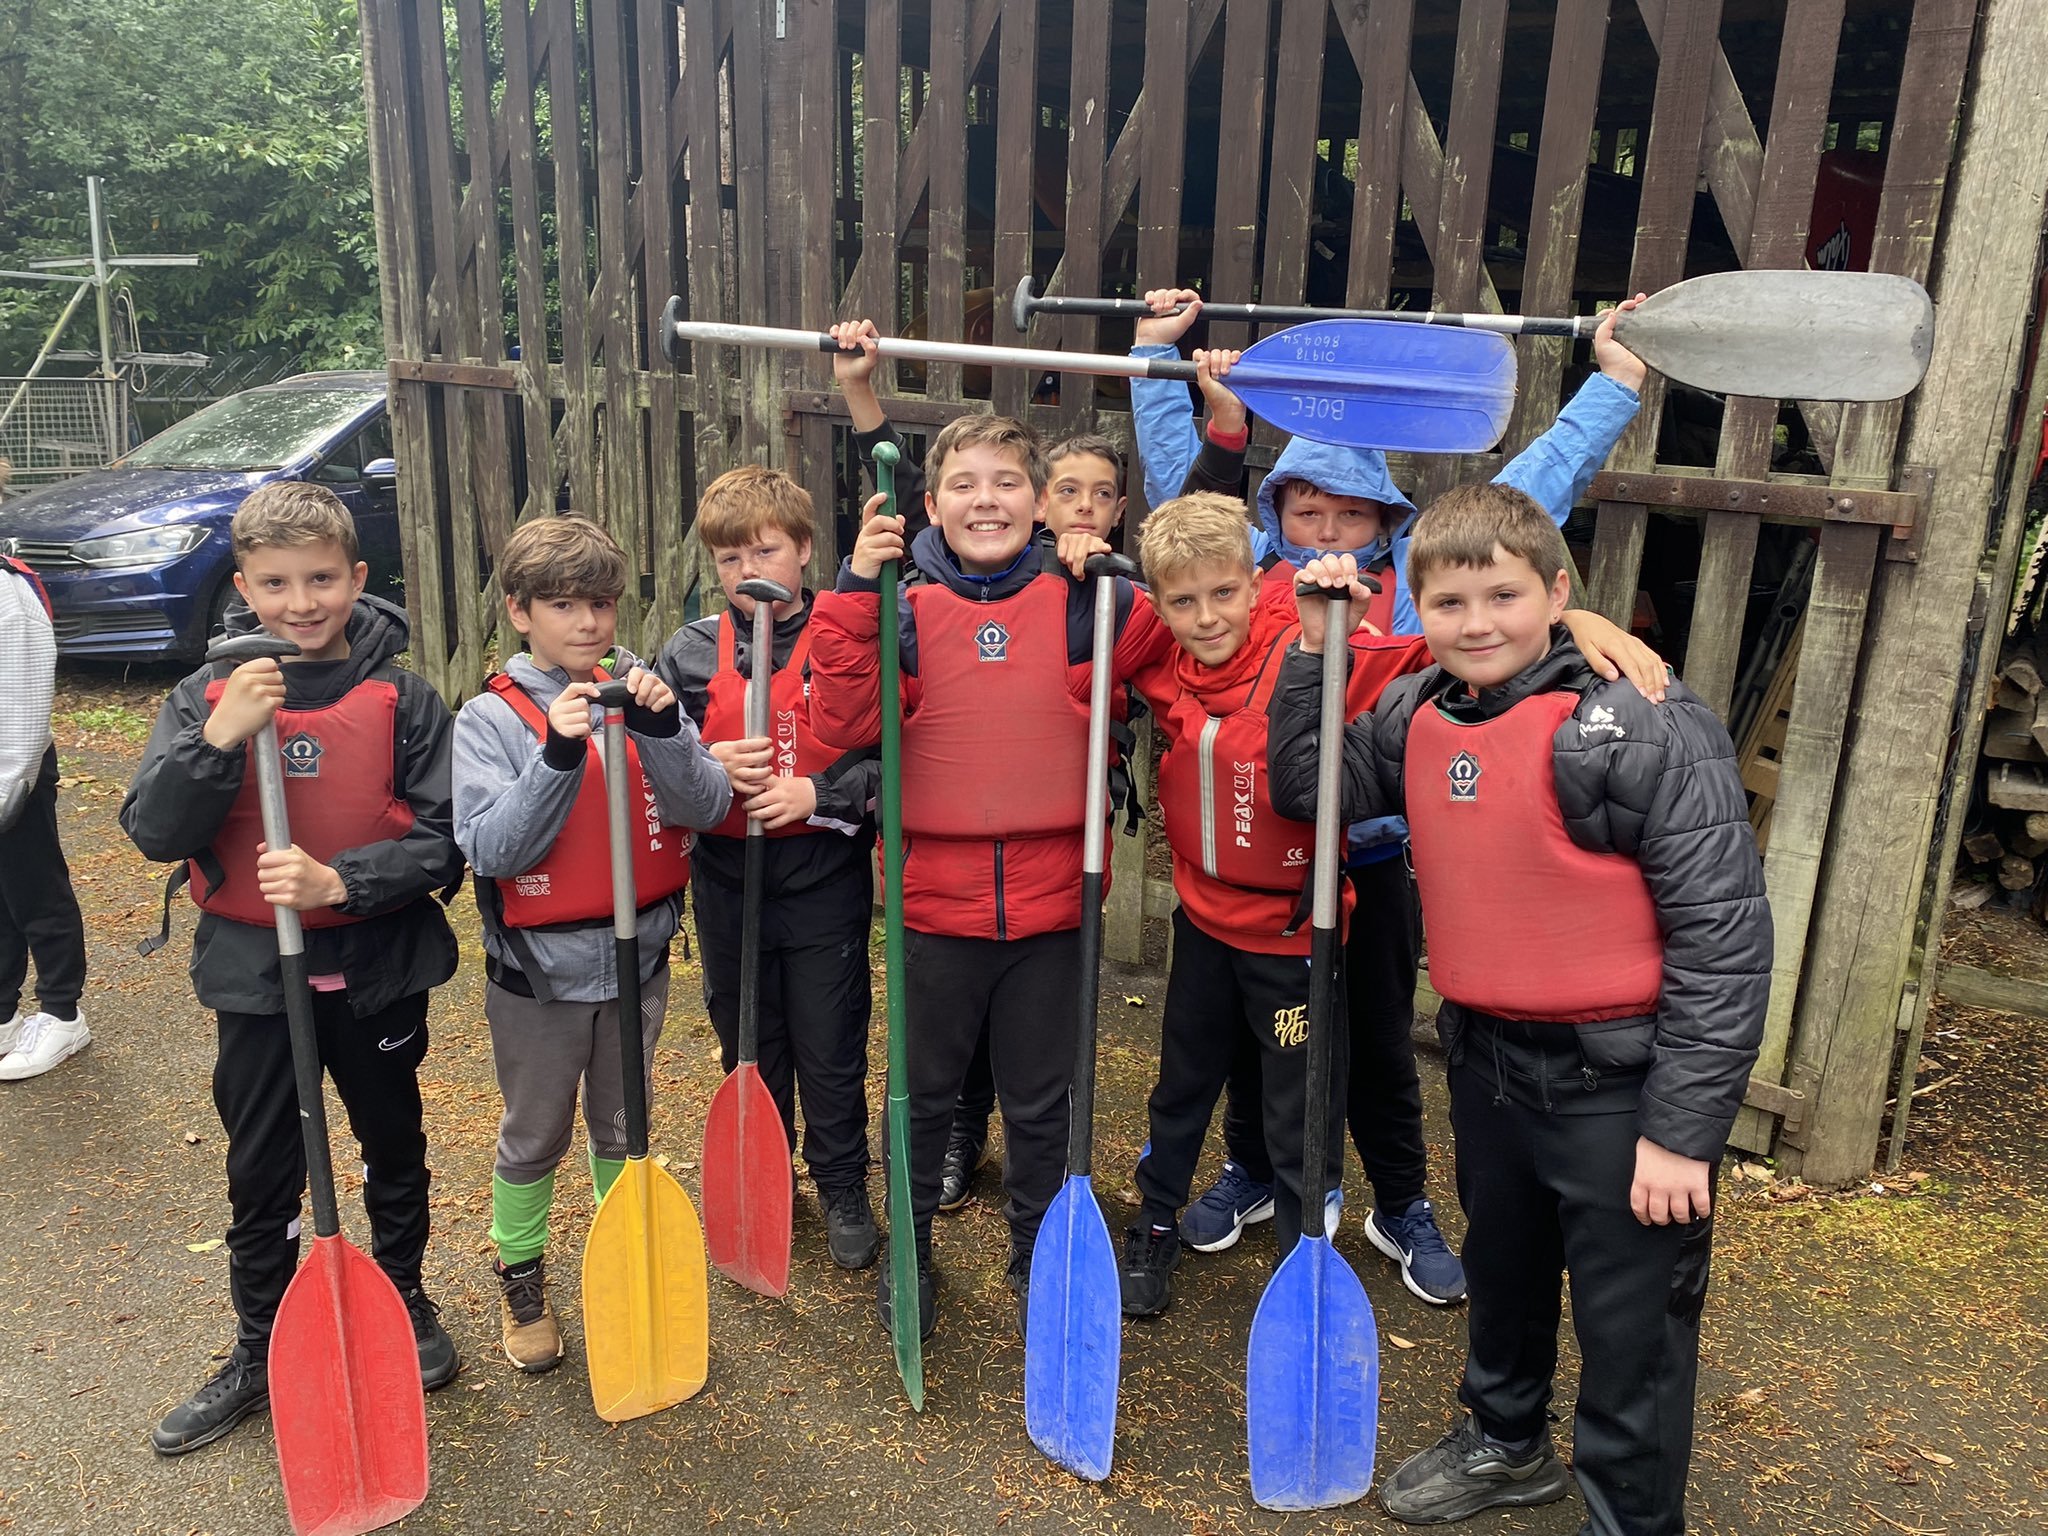 A group of boys are kitted out ready for their canoeing activity.